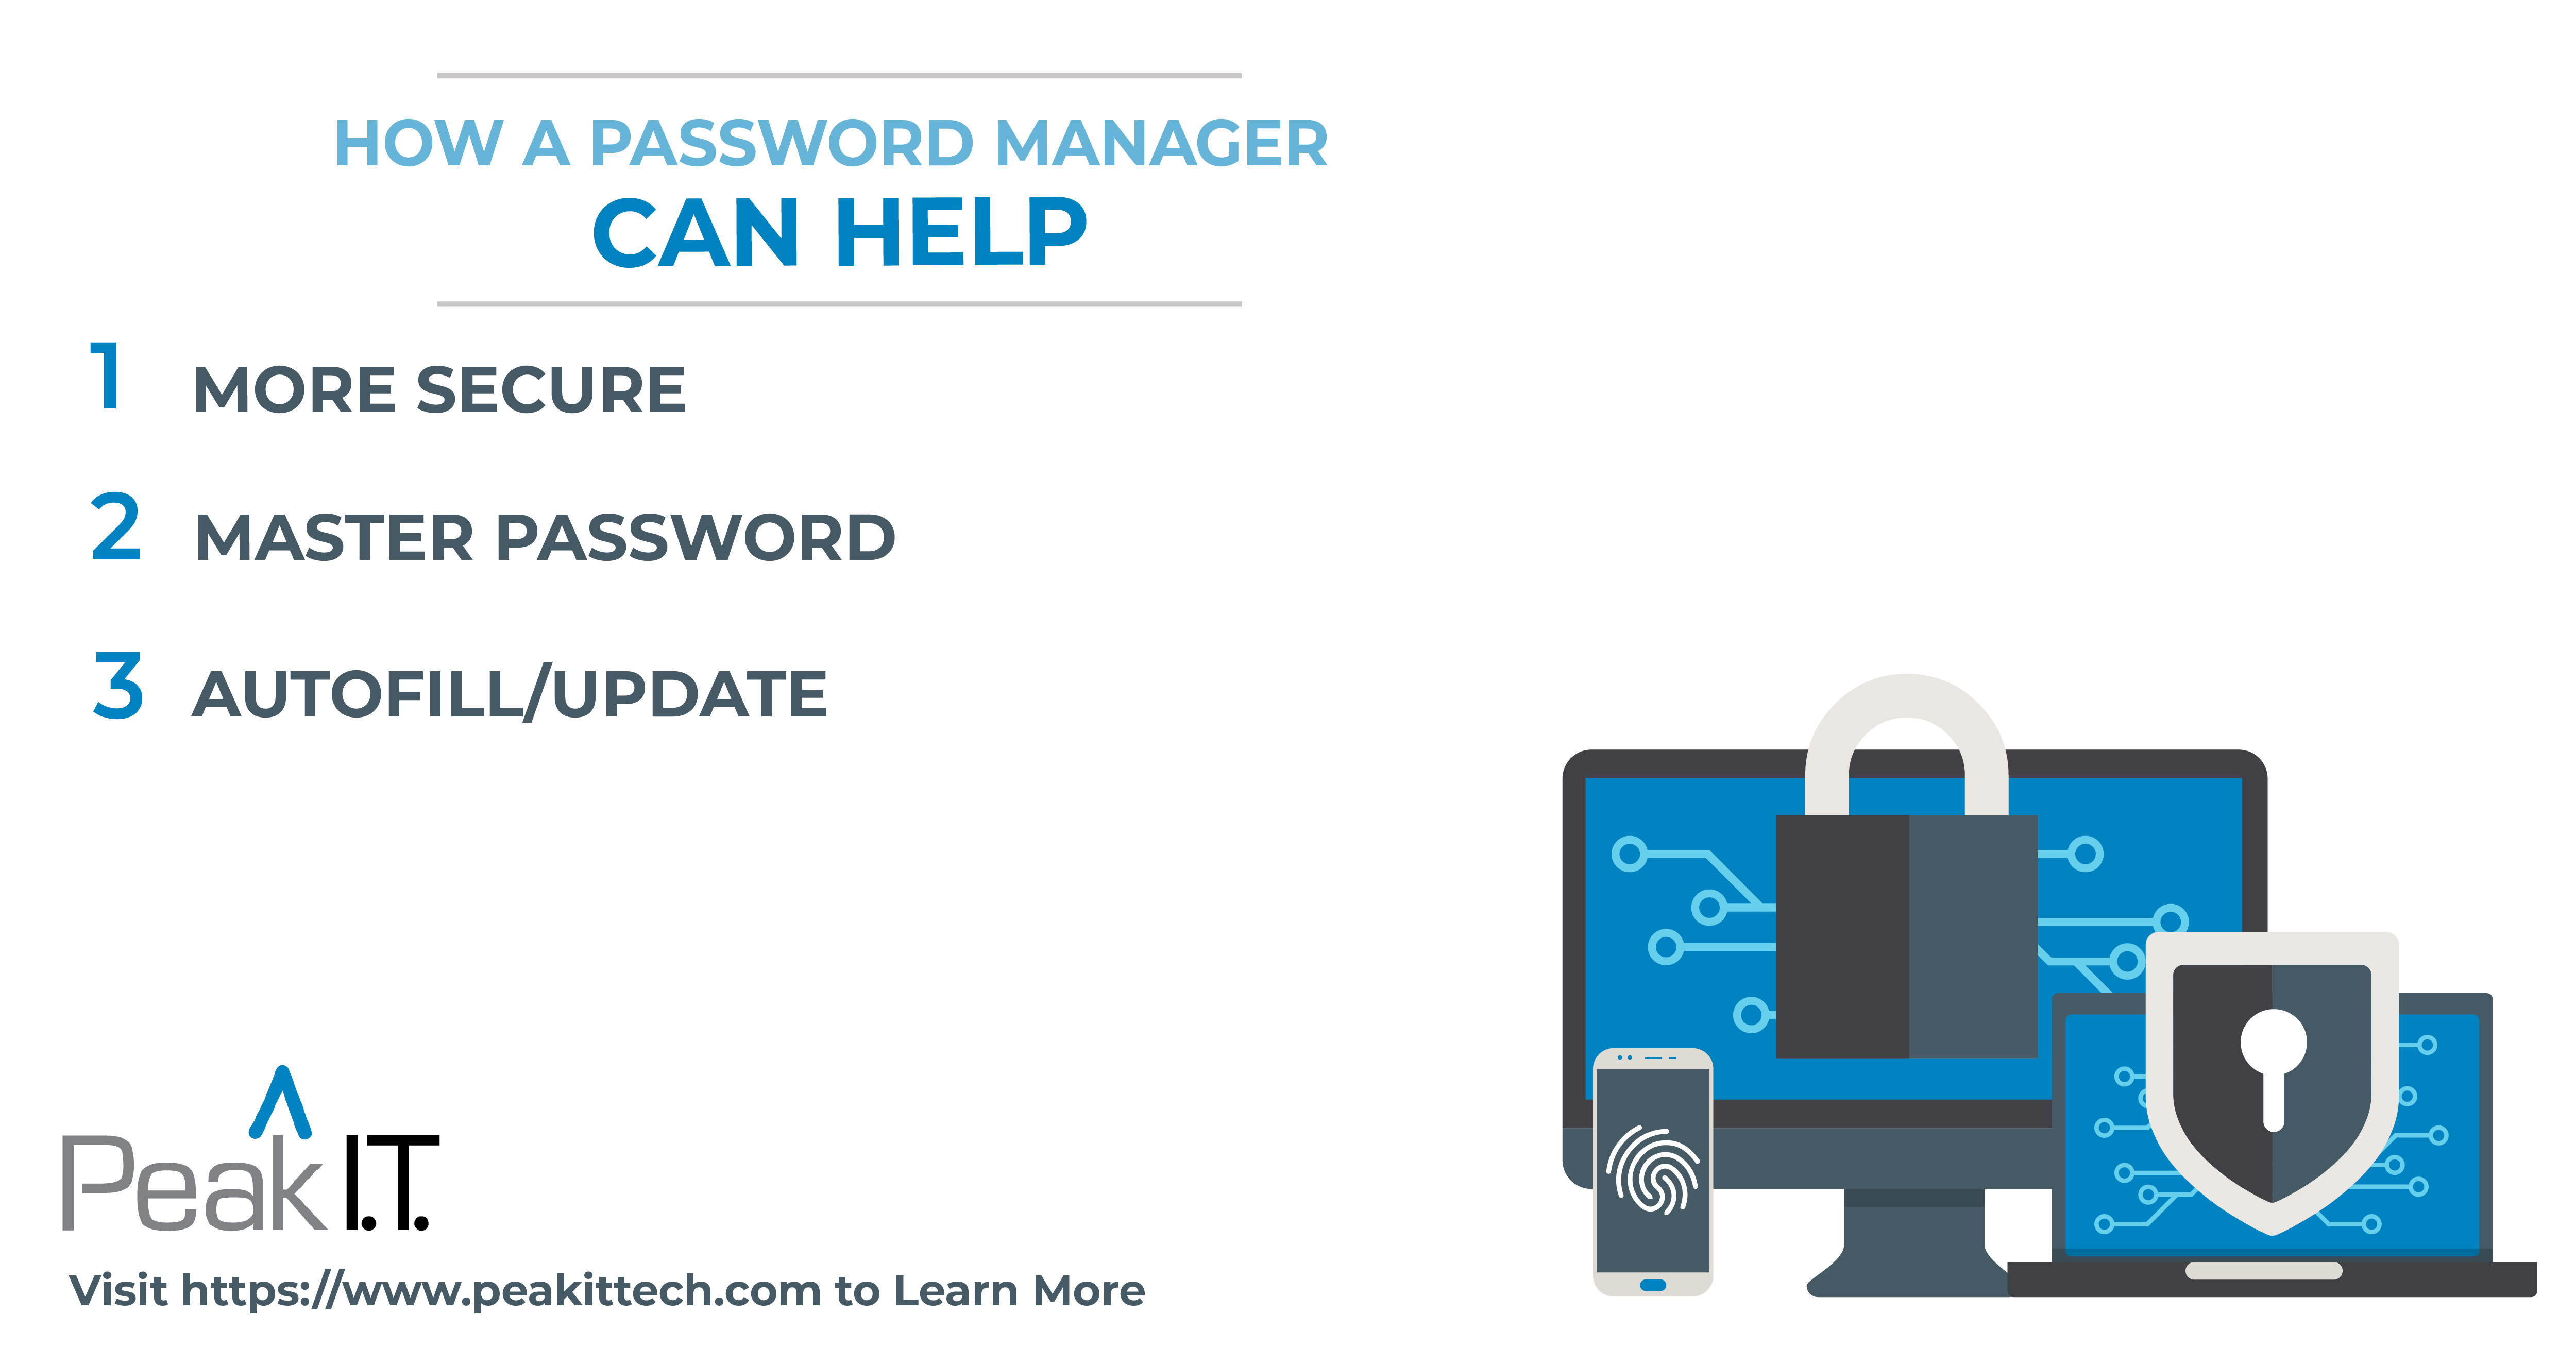 How a Password Can Help